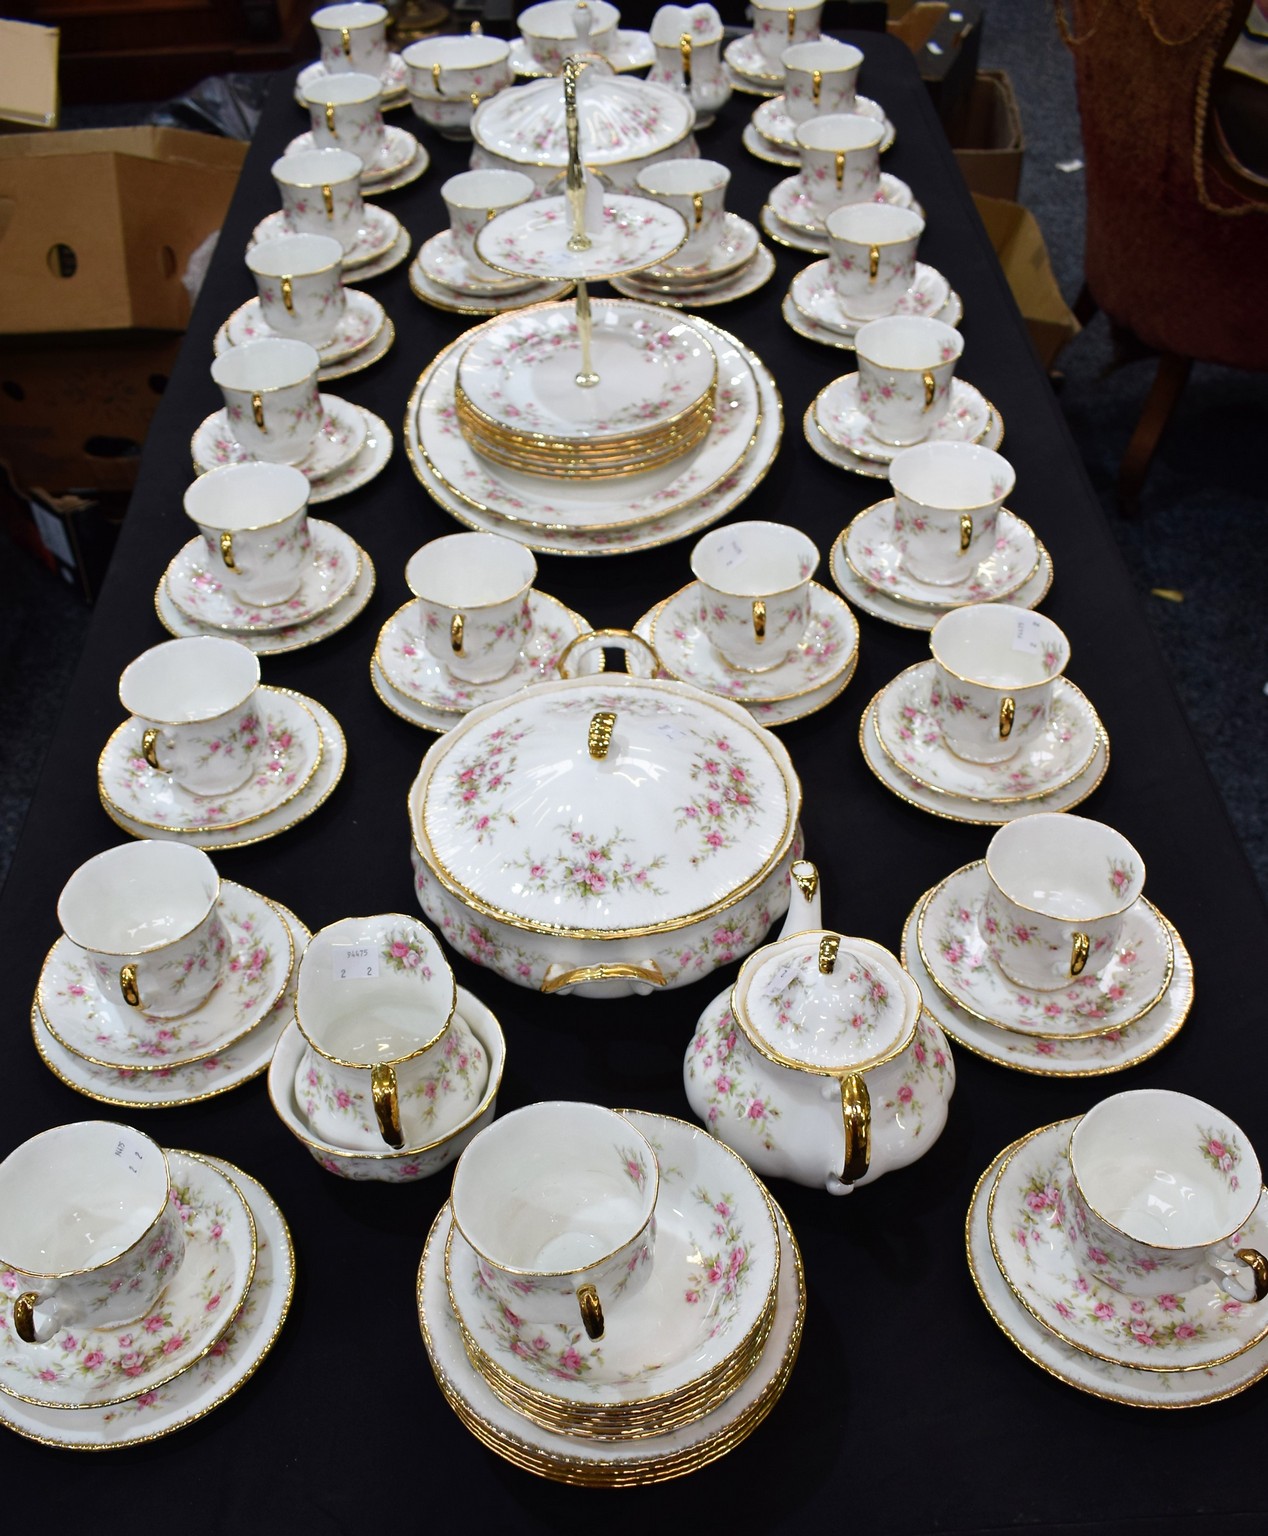 Ceramics - Paragon Victoria Rose table and teaware including cups, saucers, side plates, teapot,